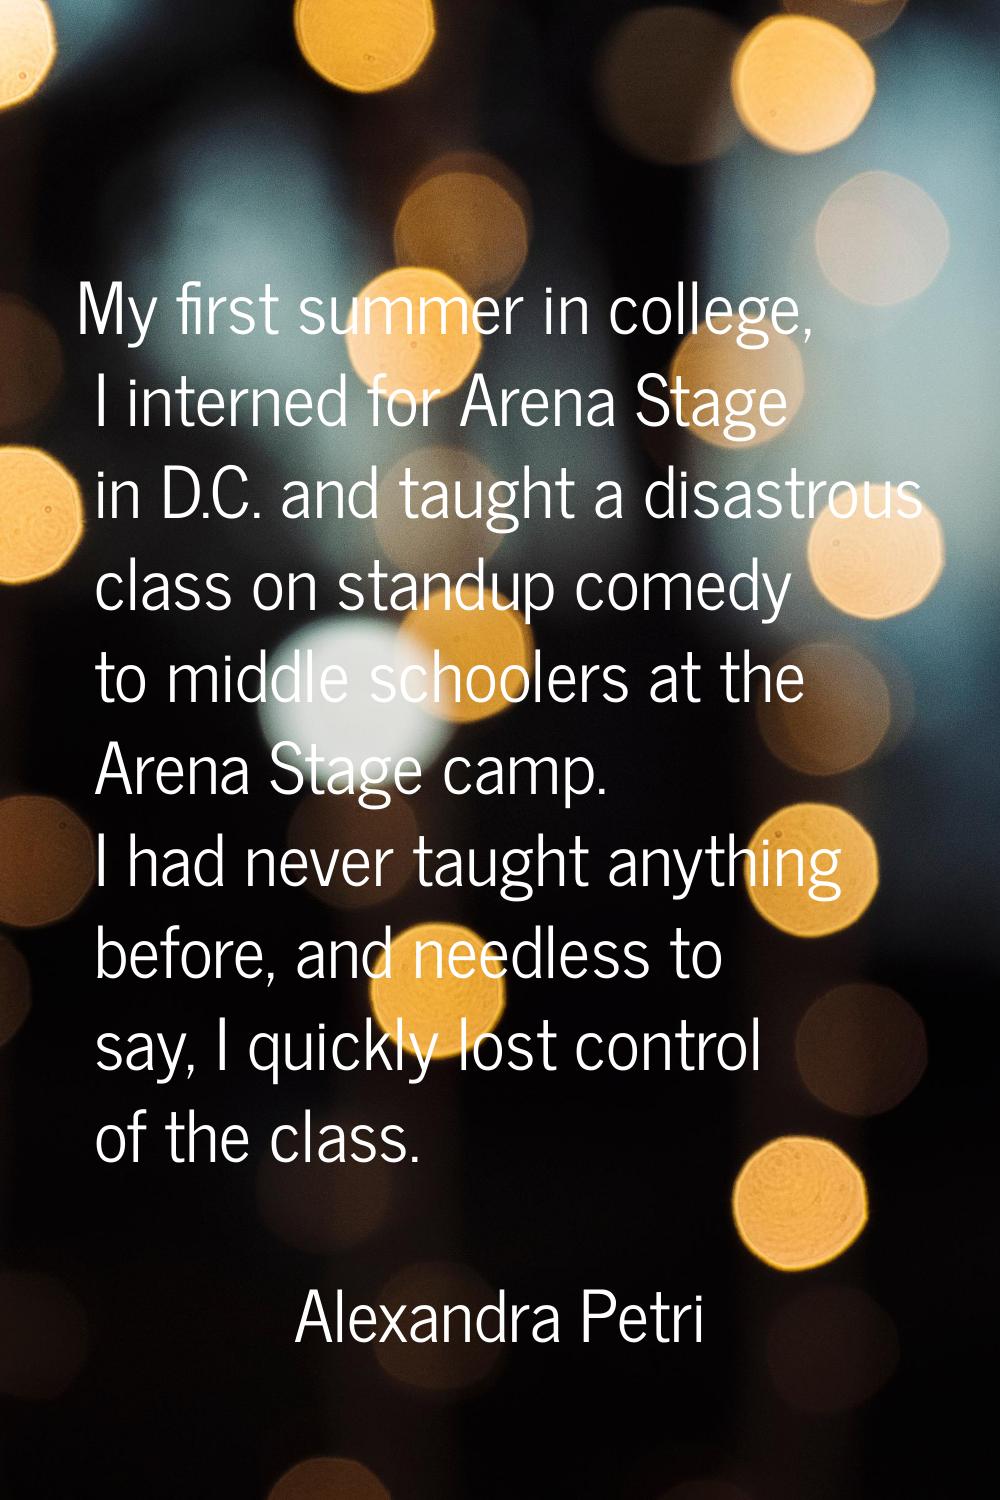 My first summer in college, I interned for Arena Stage in D.C. and taught a disastrous class on sta